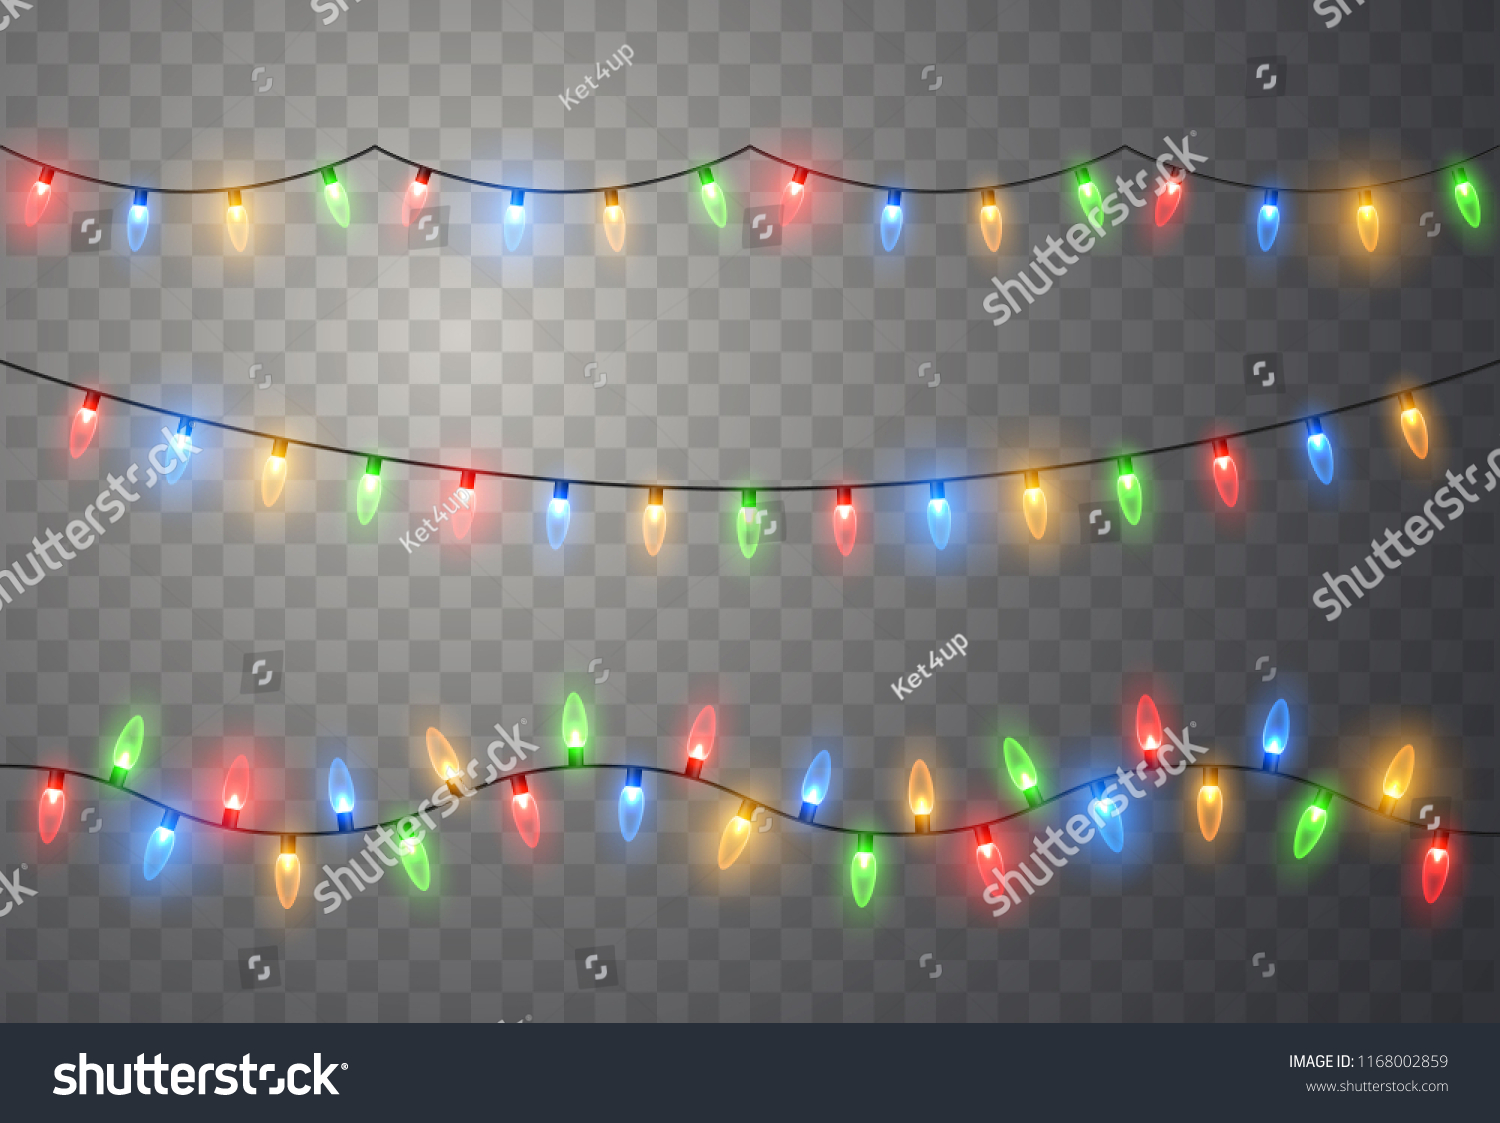 Christmas lights. Colorful Xmas garland. Vector red, yellow, blue and green glow light bulbs on wire strings isolated. #1168002859